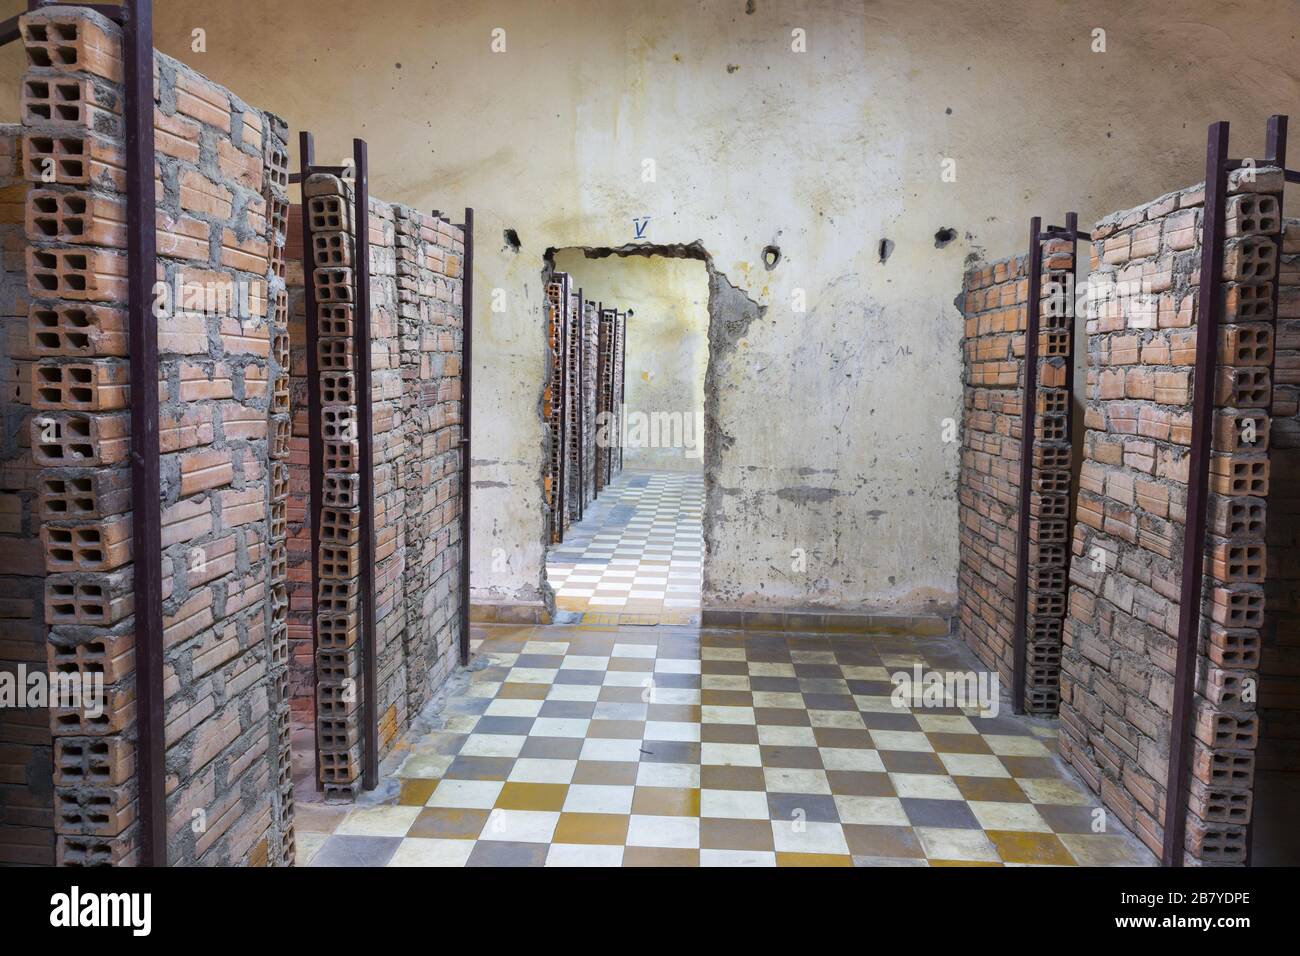 Prison Cells in Tuol Sleng War Crimes Genocide Museum inside former school used by Khmer Rouge regime as Security Prison in Phnom Pehn, Cambodia Stock Photo